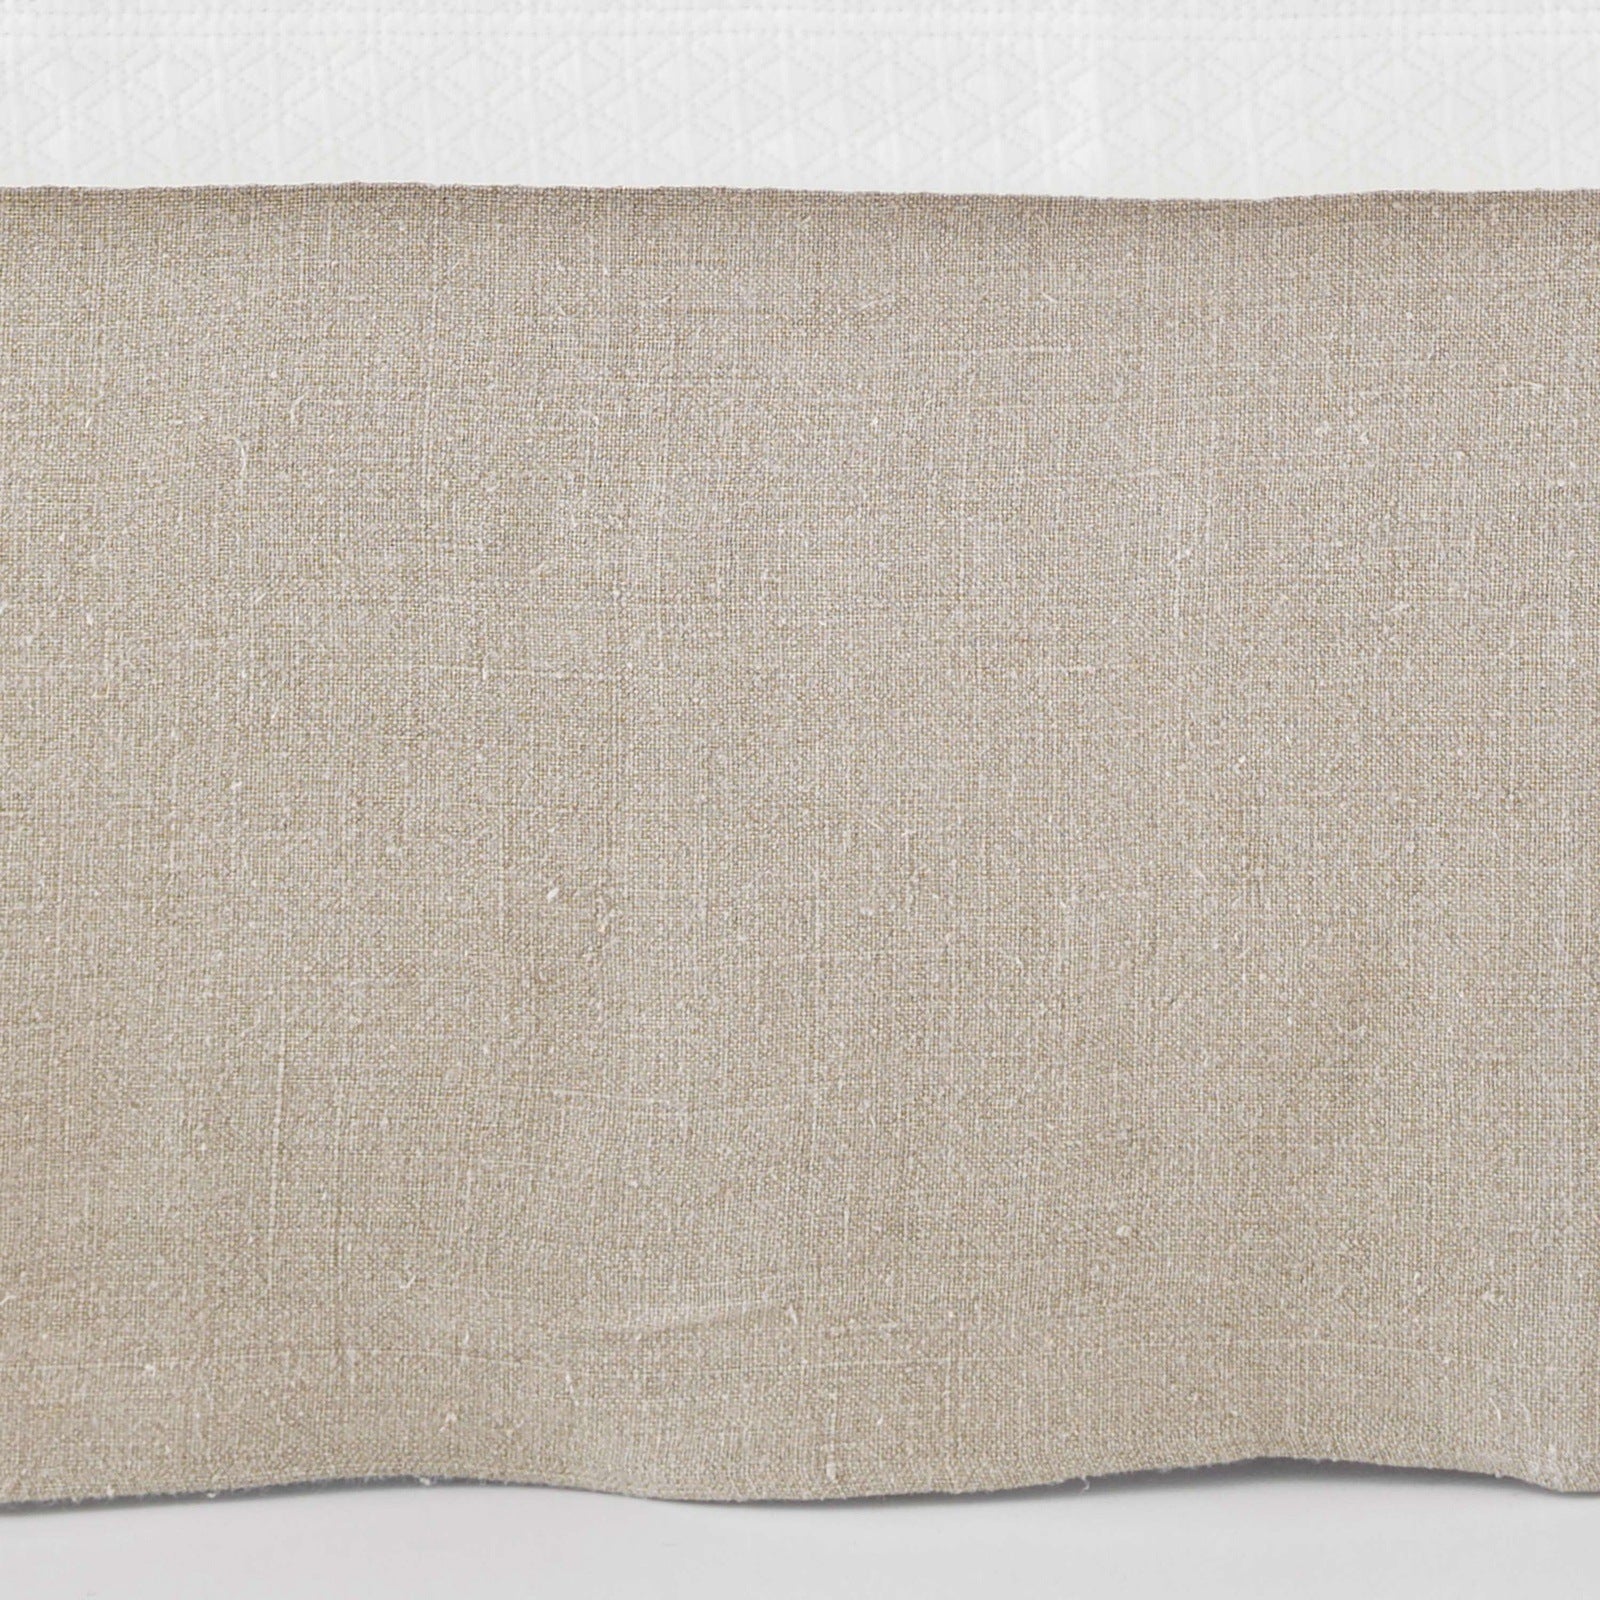 Pine Cone Hill Stone Washed Linen Natural Tailored Paneled Bed Skirt